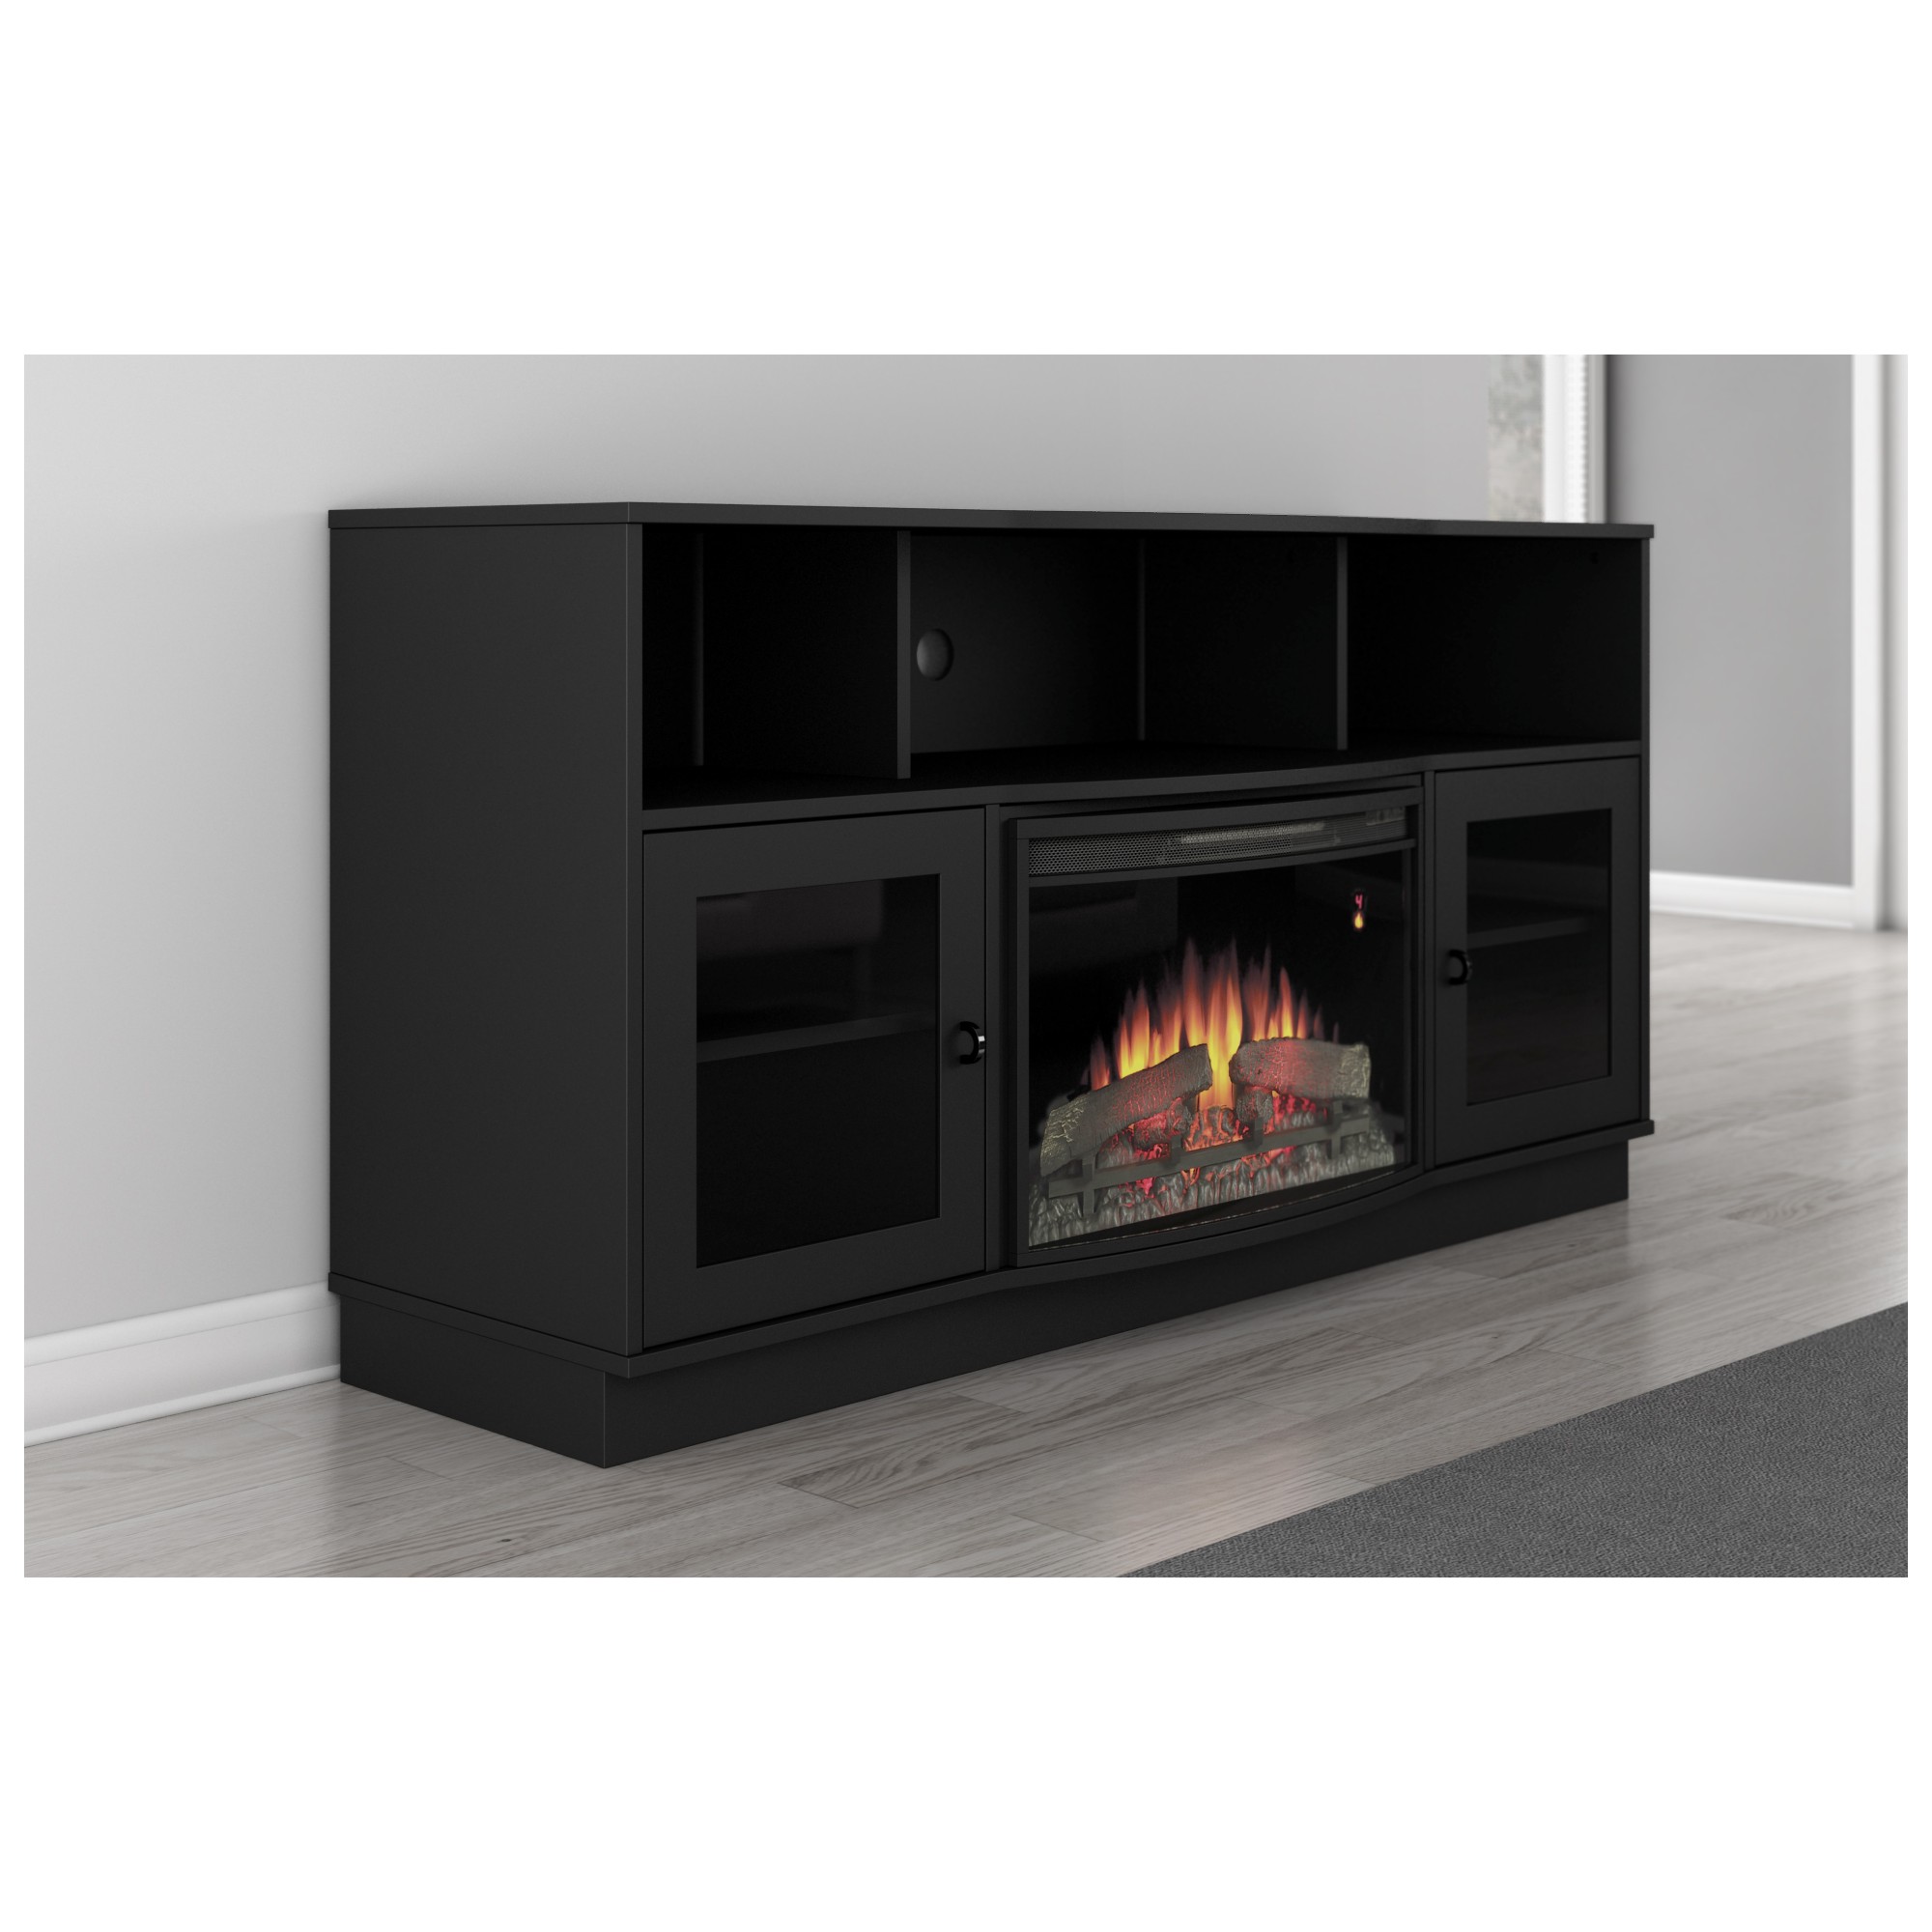 Furnitech FT64CFB 66 Inch TV Stand Contemporary w/ Curved Front Electric Fireplace Black Furnitech-FT64CFB